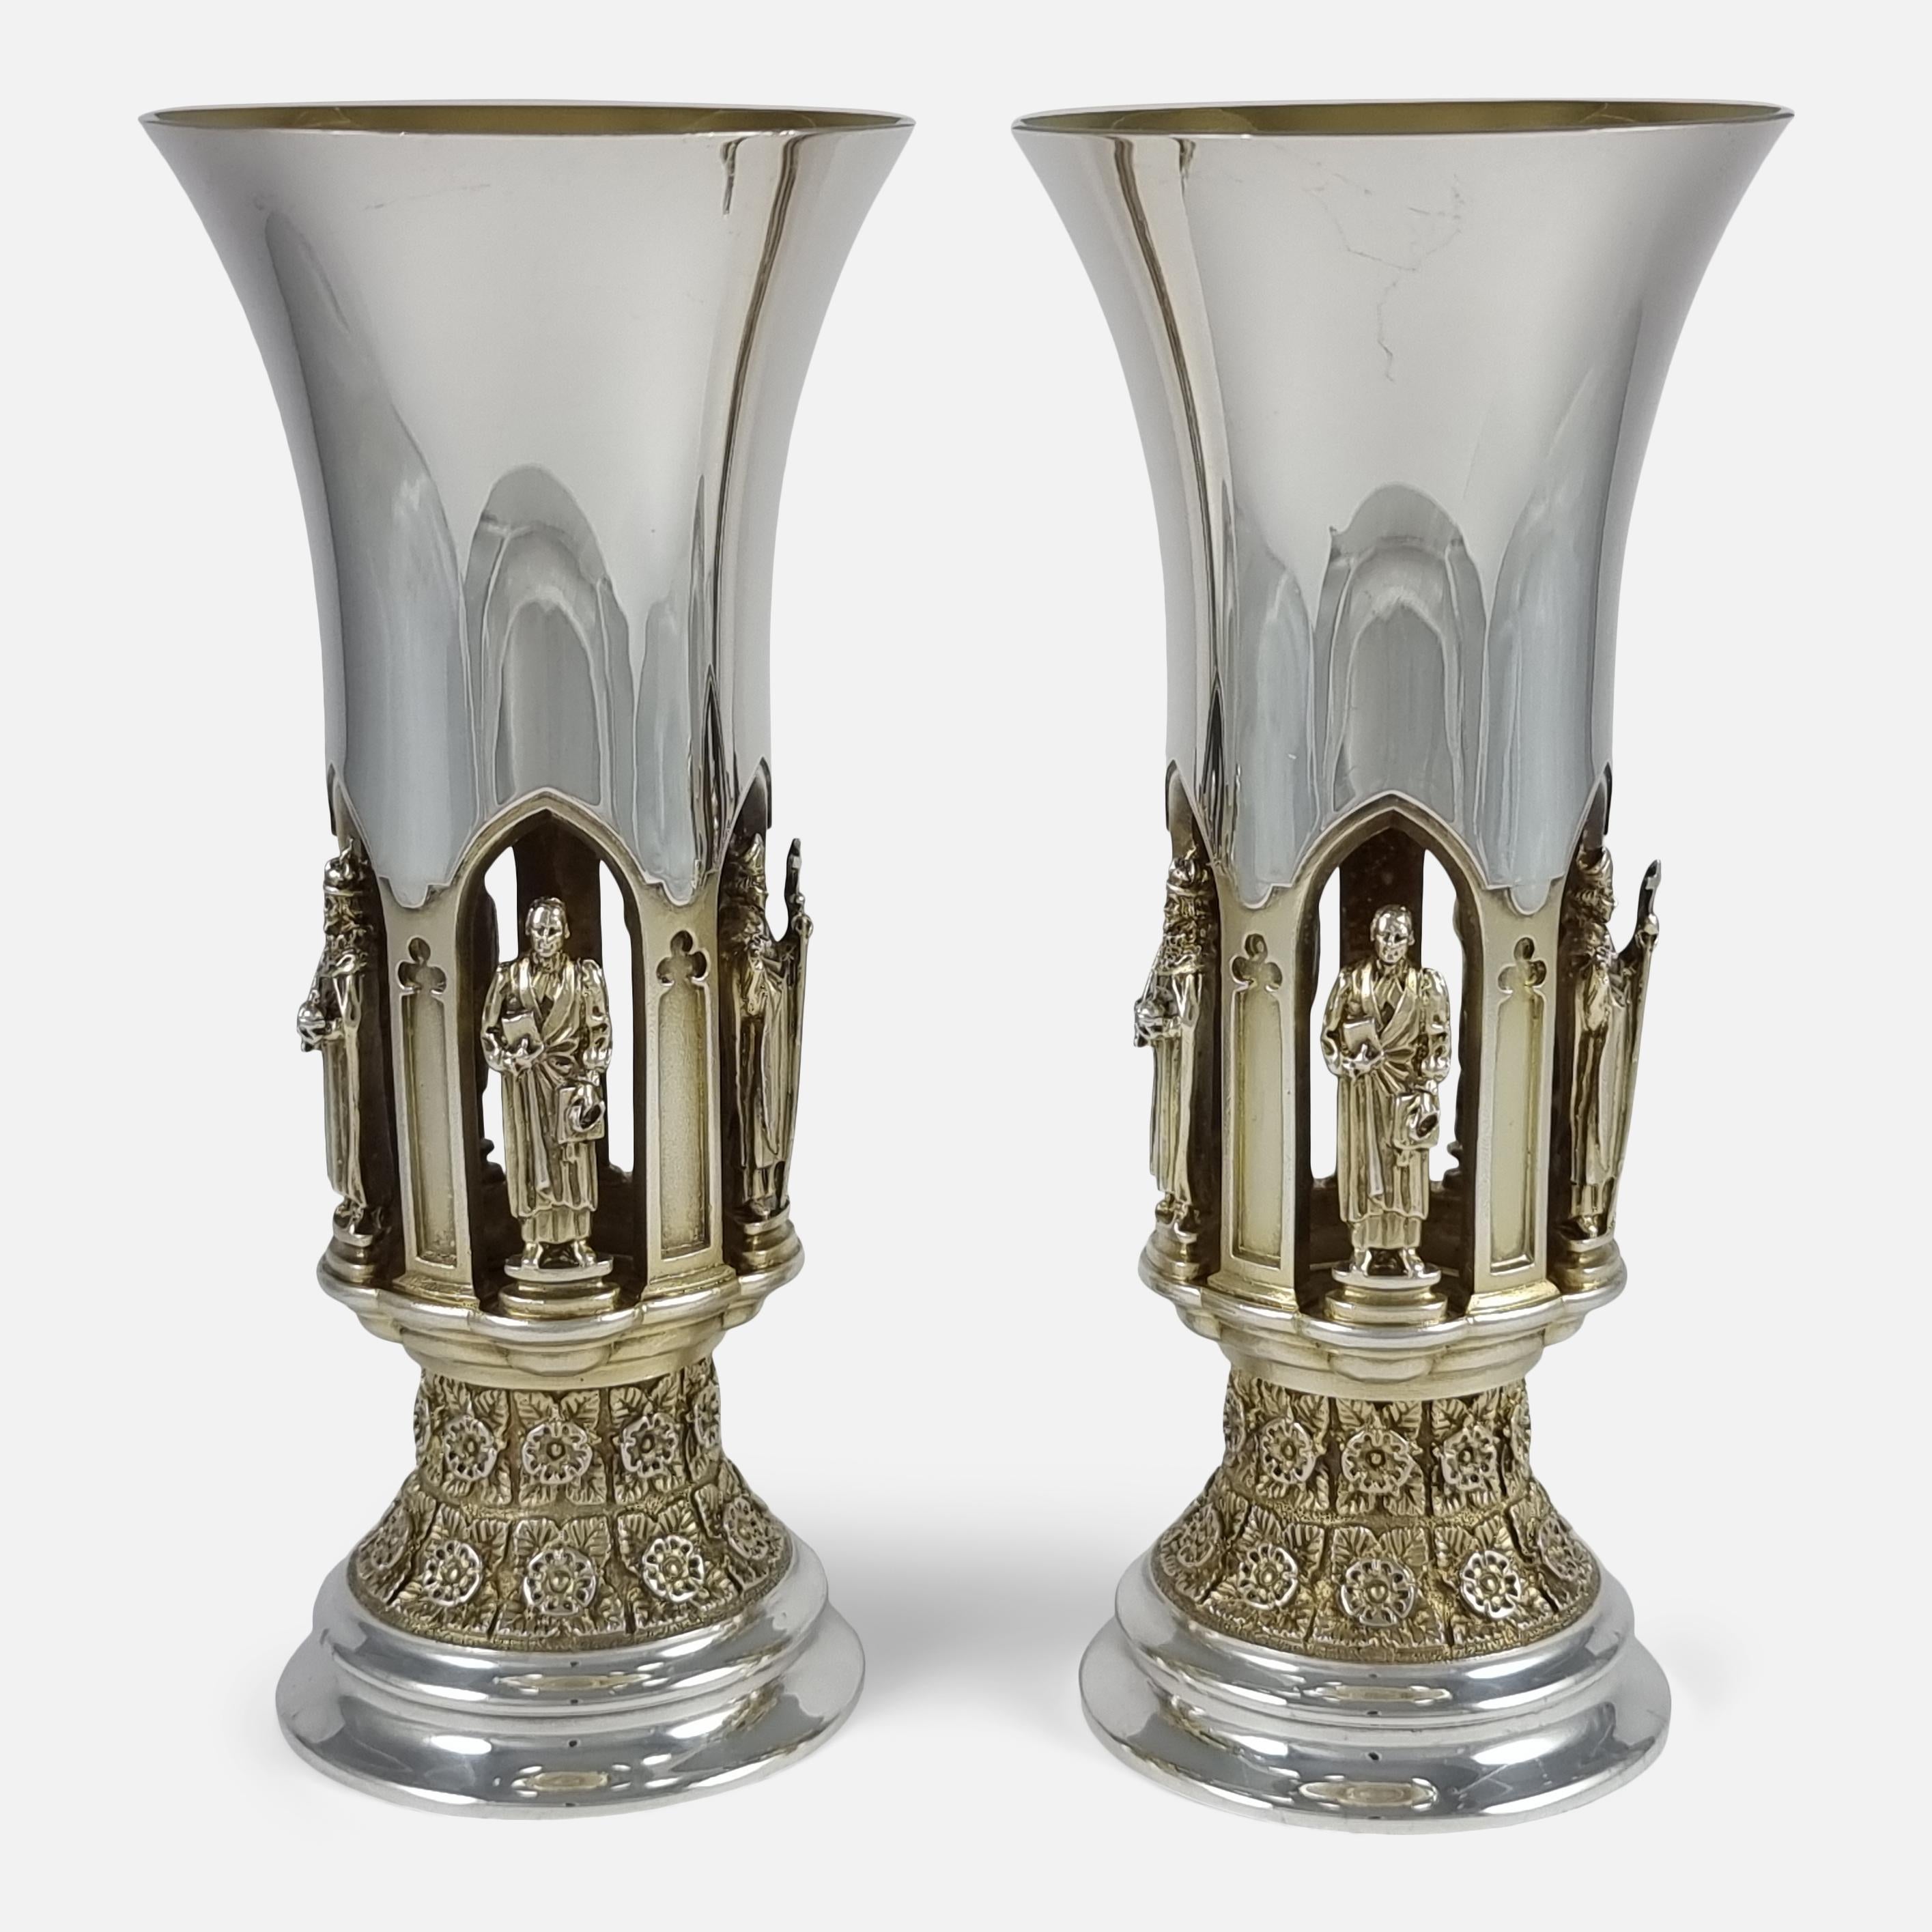 Late 20th Century Pair of Aurum Silver Gilt 'Ripon Diocese Foundation' Goblets by Hector Miller